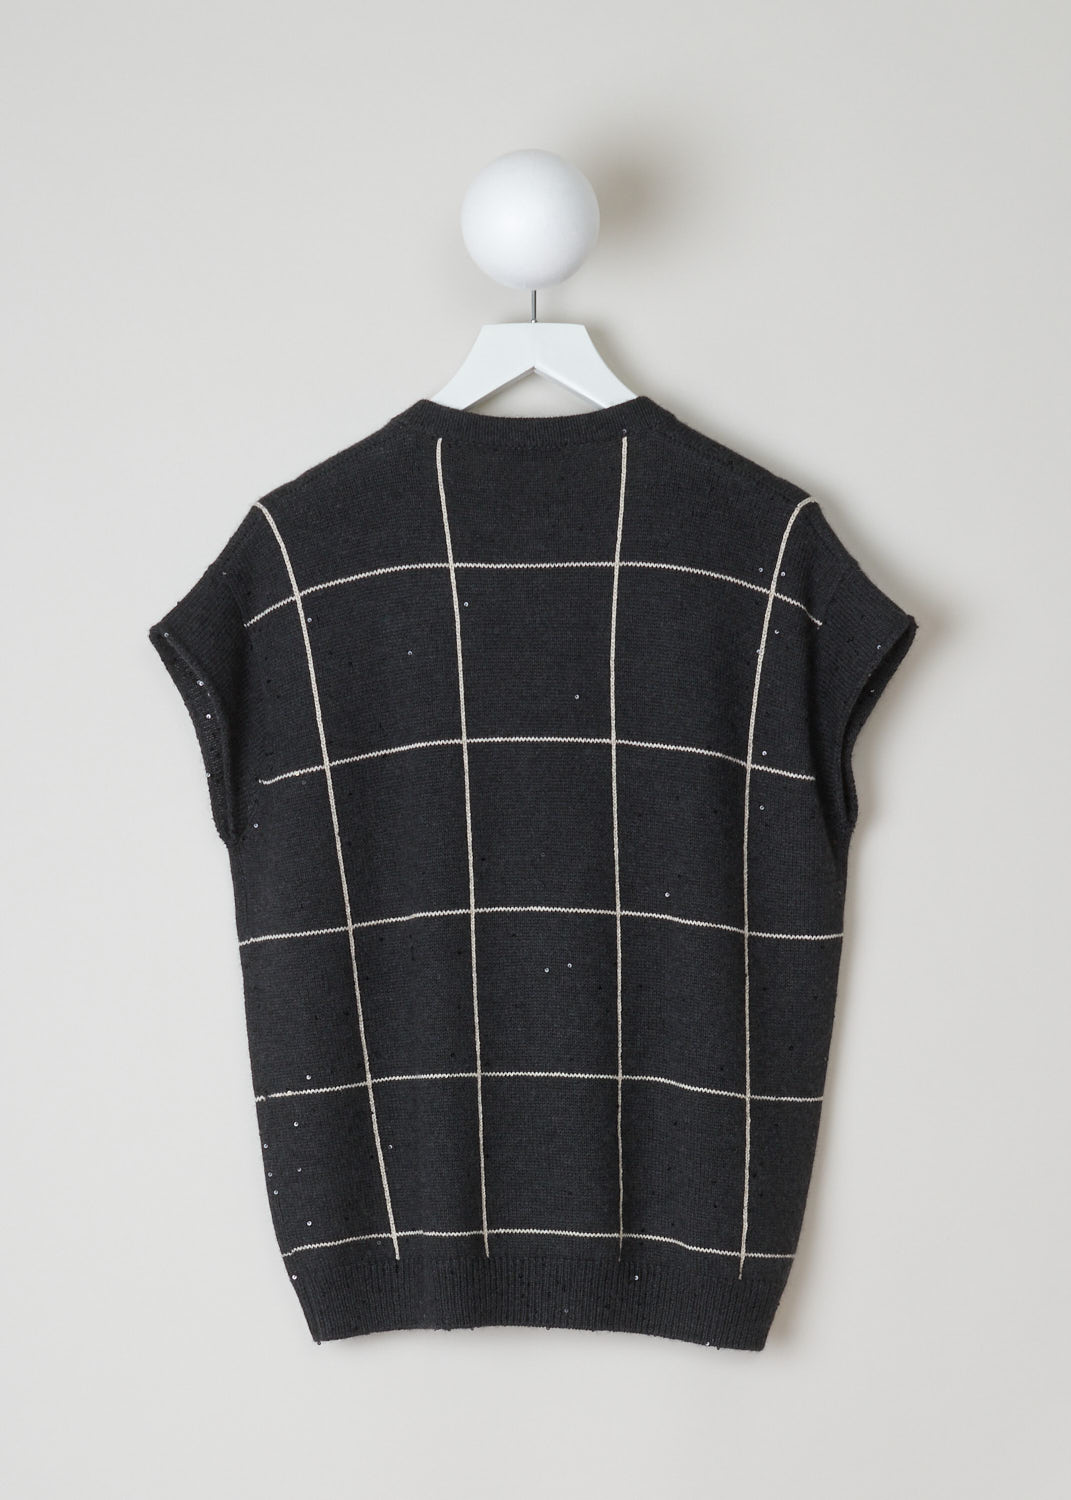 Brunello Cucinelli, charcoal checkered spencer, M73542302_CE420, black white, back, Made with a large check checkered pattern. This spencer has an oversized fit. Featuring a deep v-neckline and charcoal coloured sequins only visible when the light hits them.